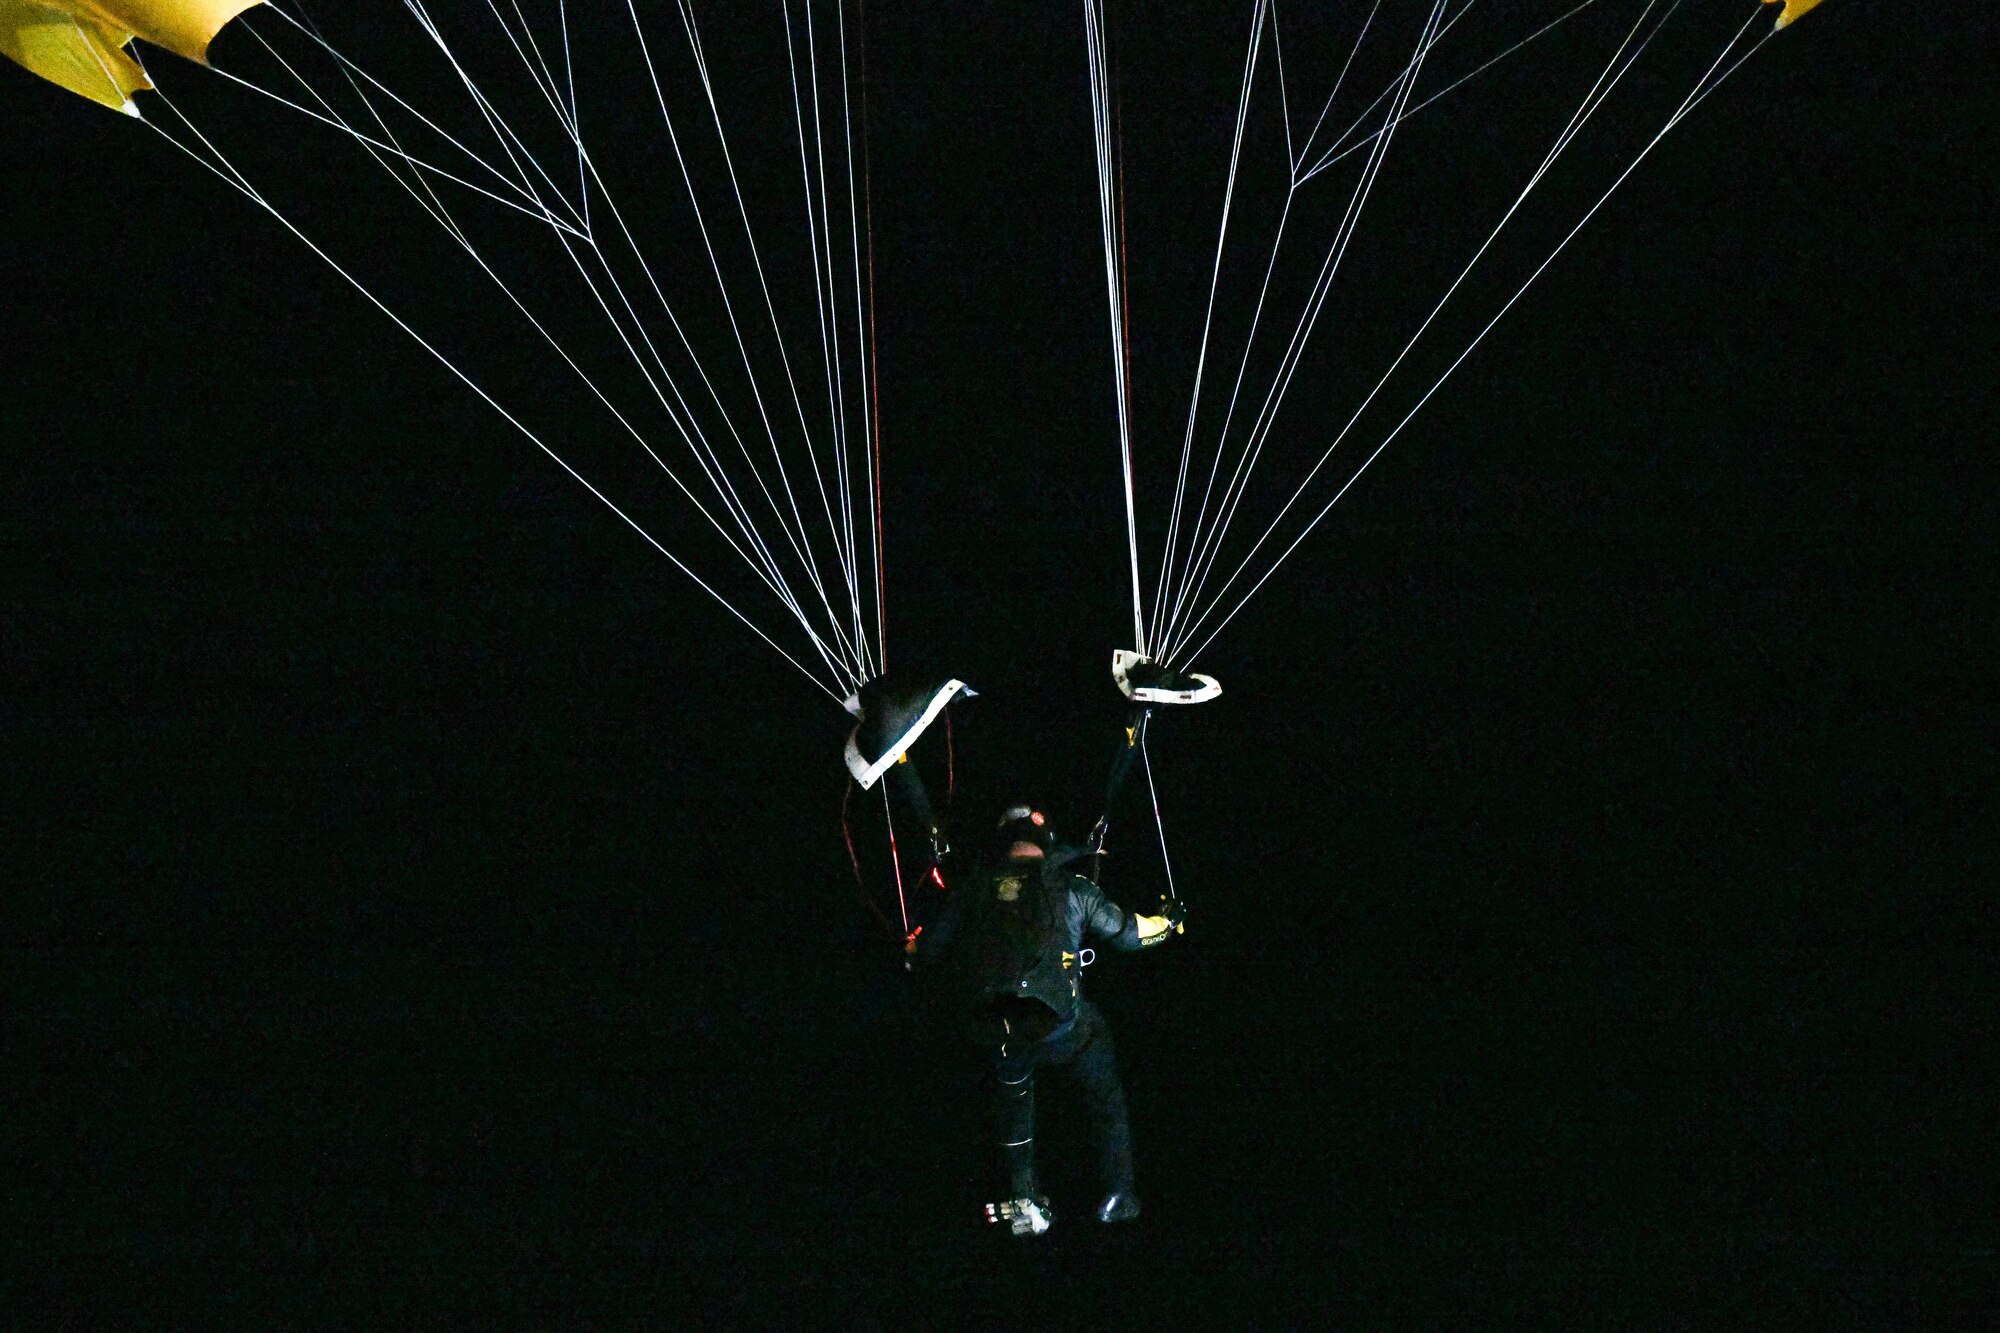 Parachuter flying in the night